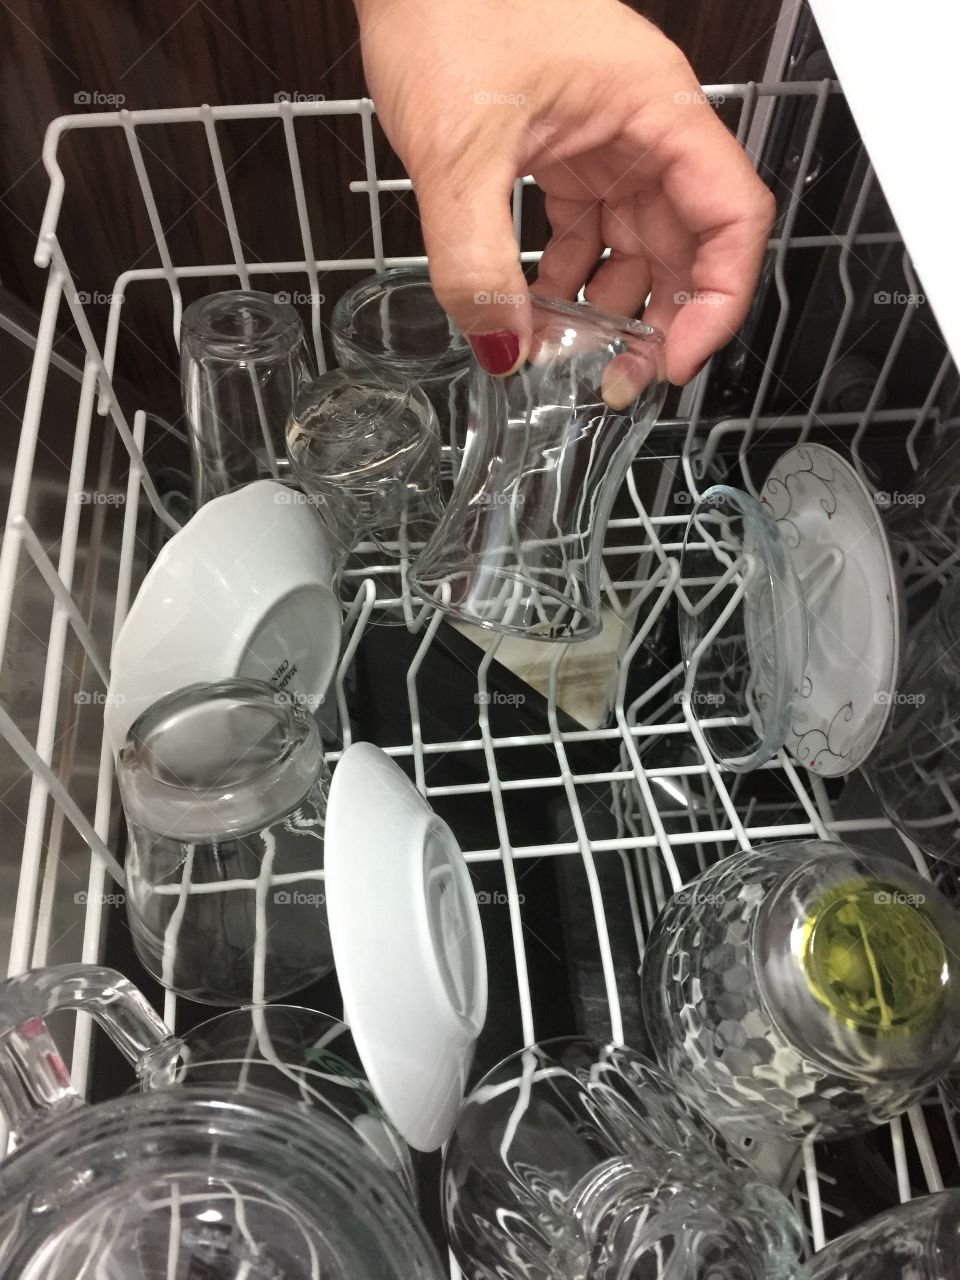 Dishes in the dishwasher 